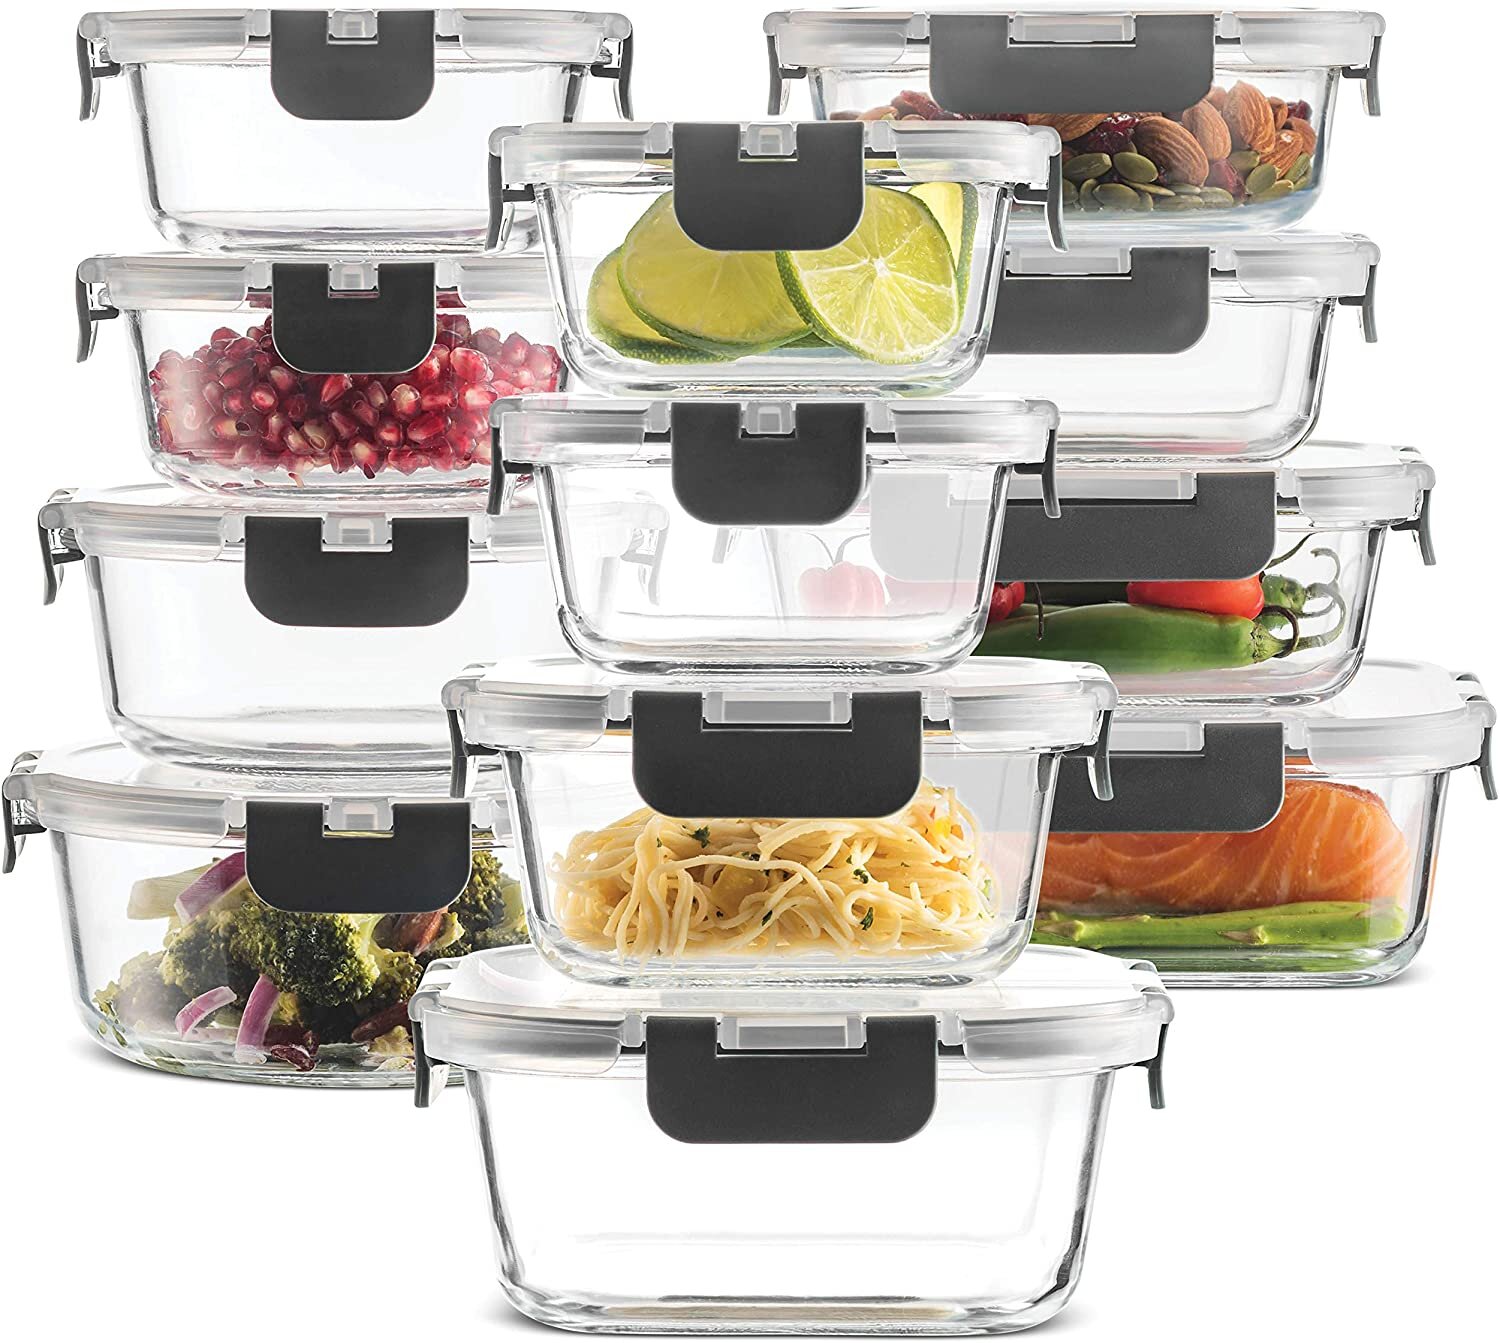 24-Piece Superior Glass Food Storage Containers Set - Newly Innovated Hinged BPA-free Locking lids - 100% Leakproof Glass Meal-Prep Containers, Great...